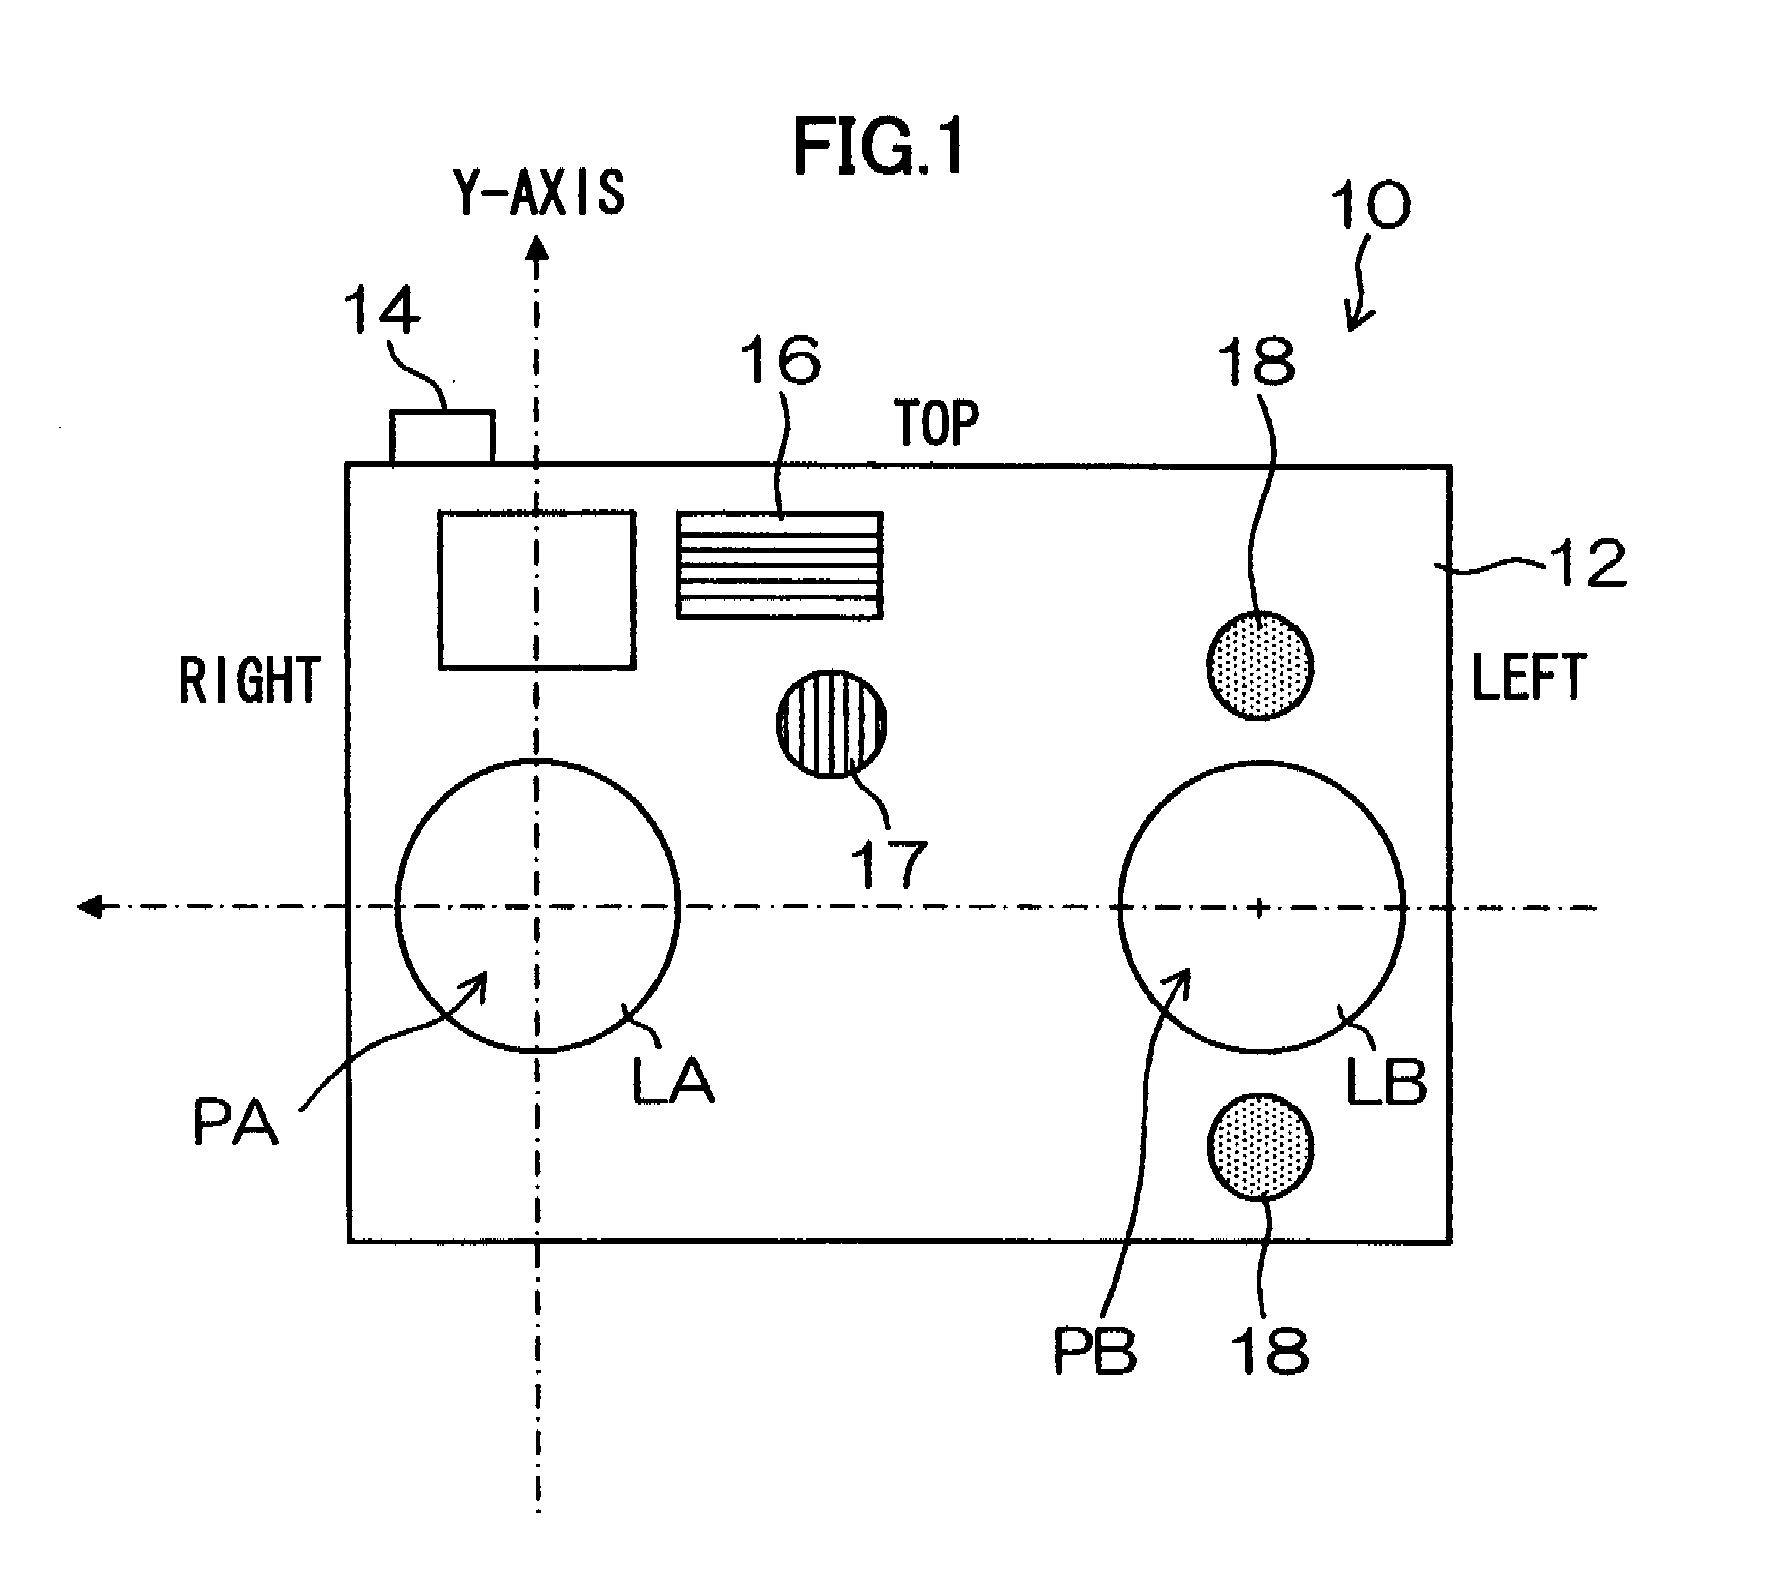 Method of generating range images and apparatus therefor